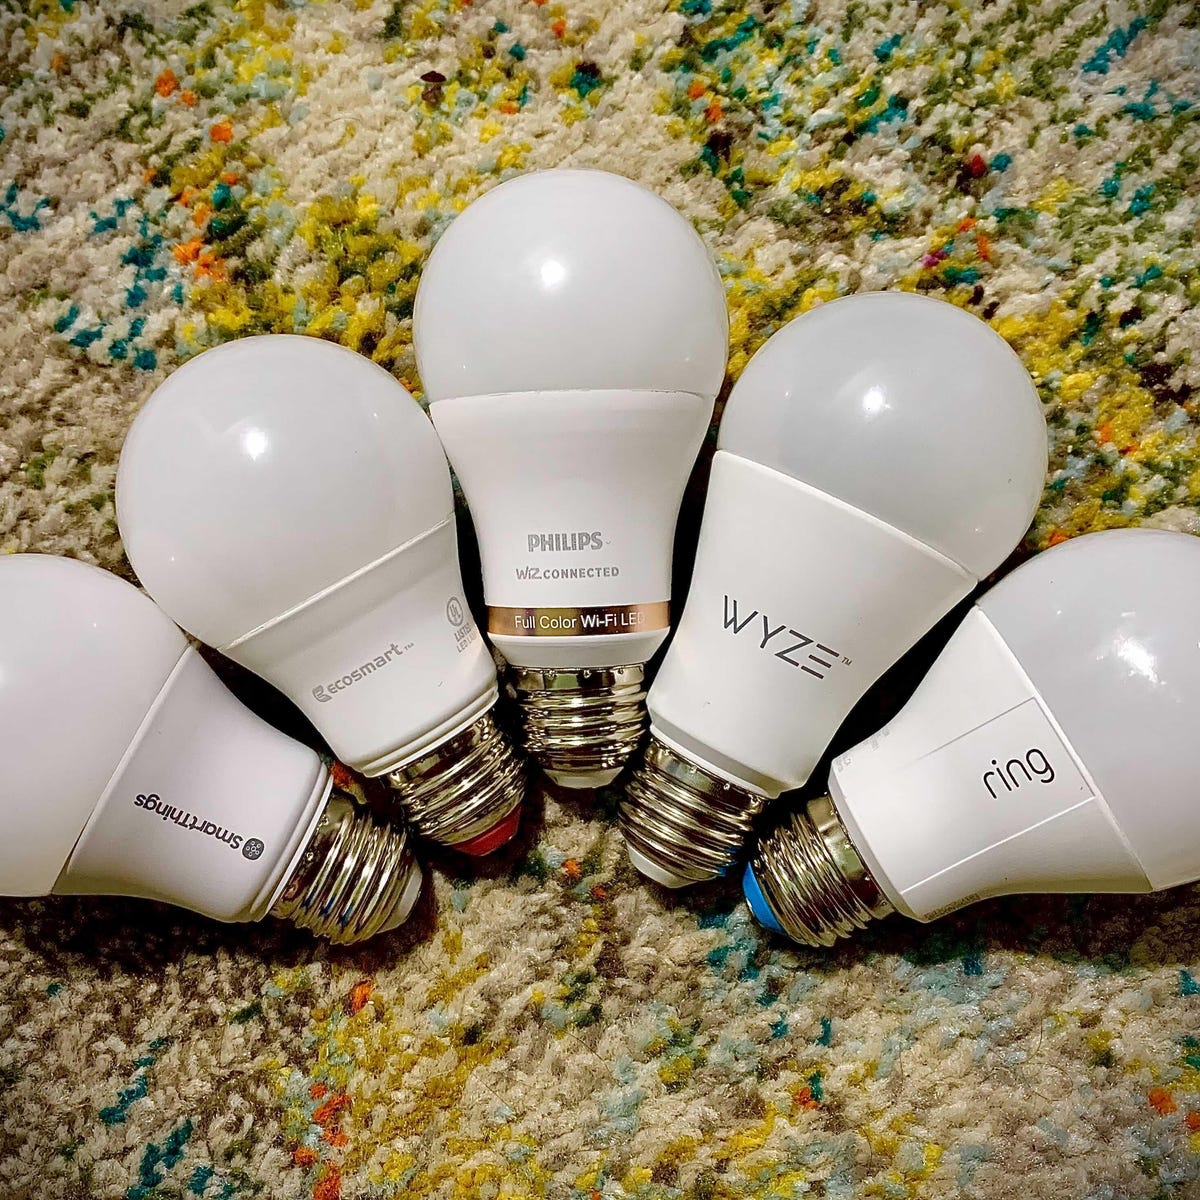 The Best Smart Bulbs for Less Than $20: Wiz, GE and More -